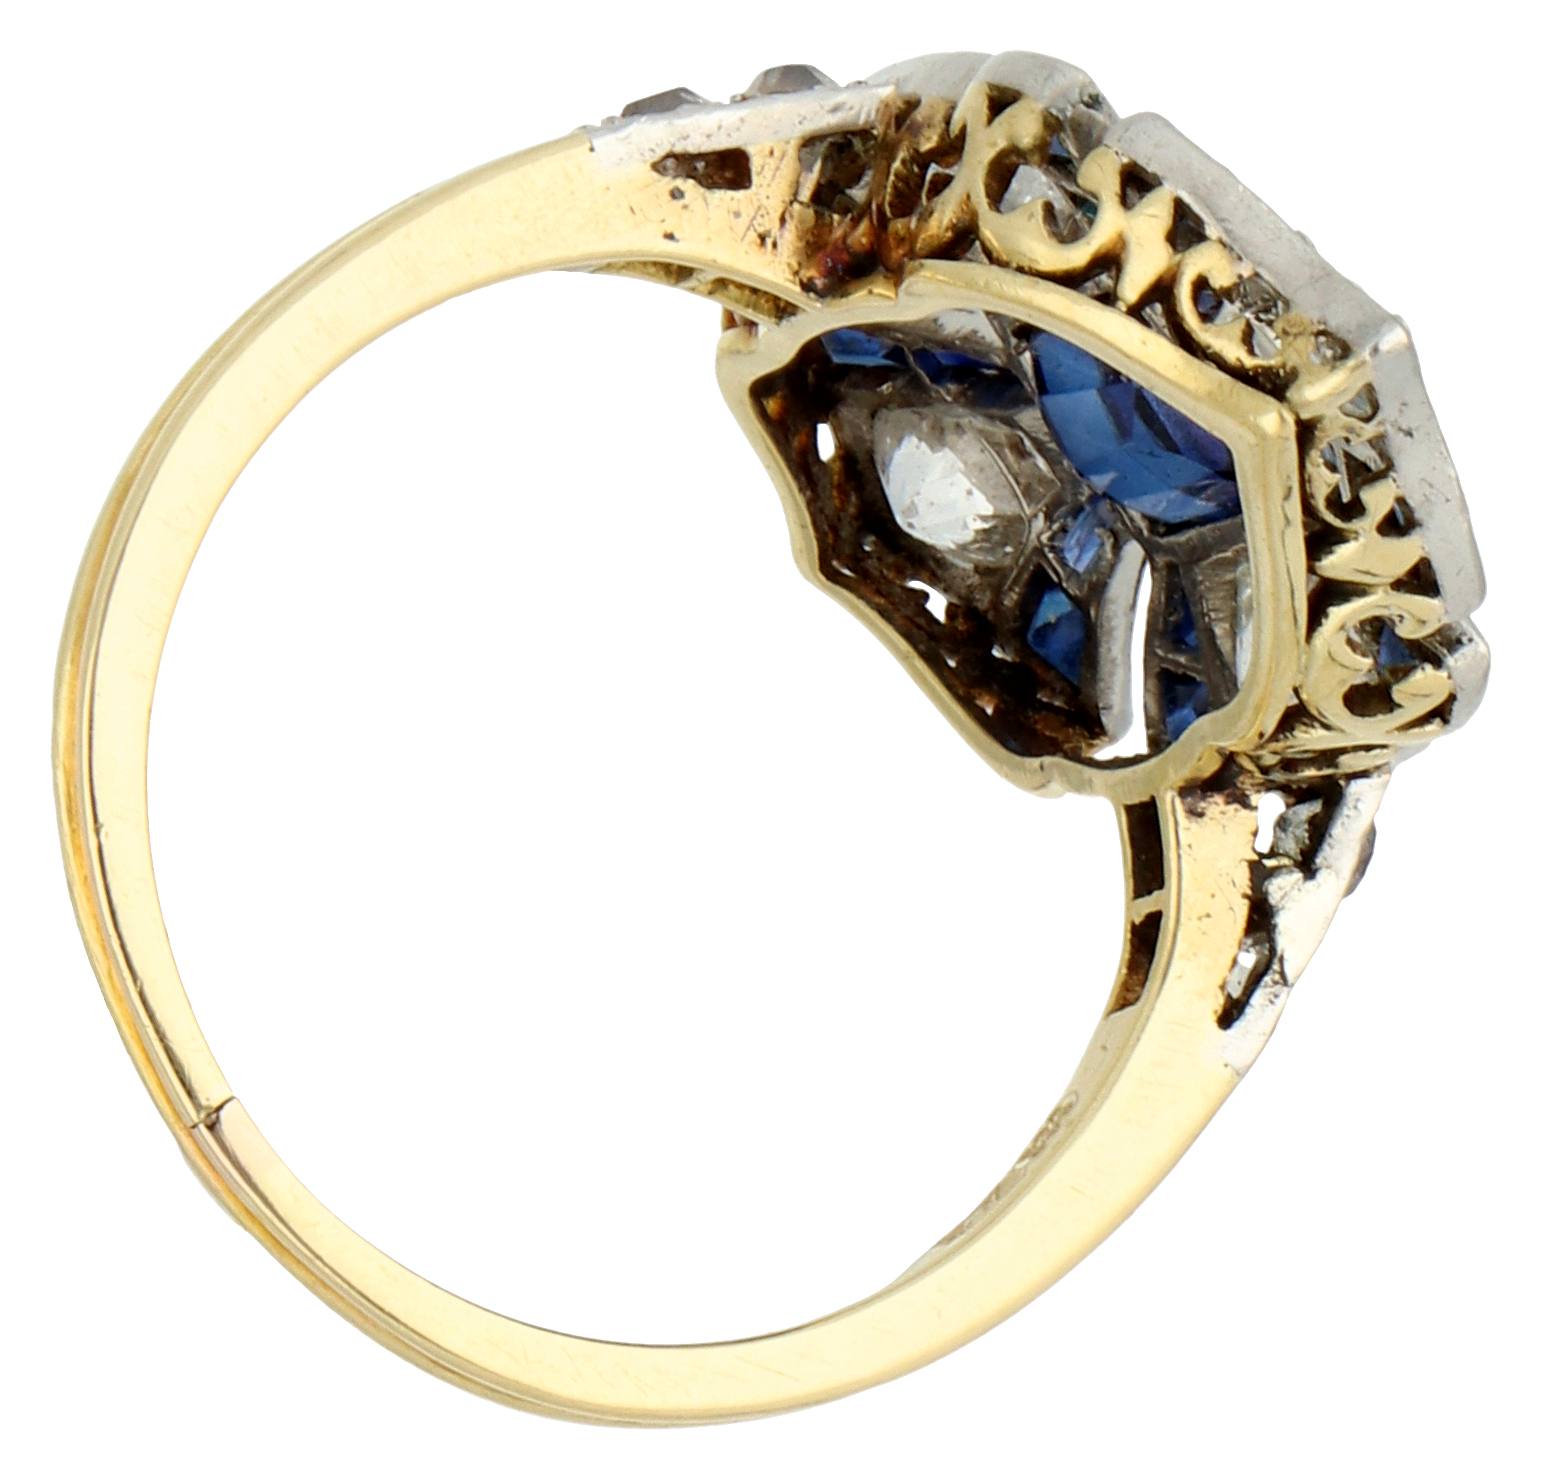 No Reserve - Gold/platinum Art Deco ring set with approx. 0.48 ct. diamond and synthetic sapphire. - Image 2 of 3